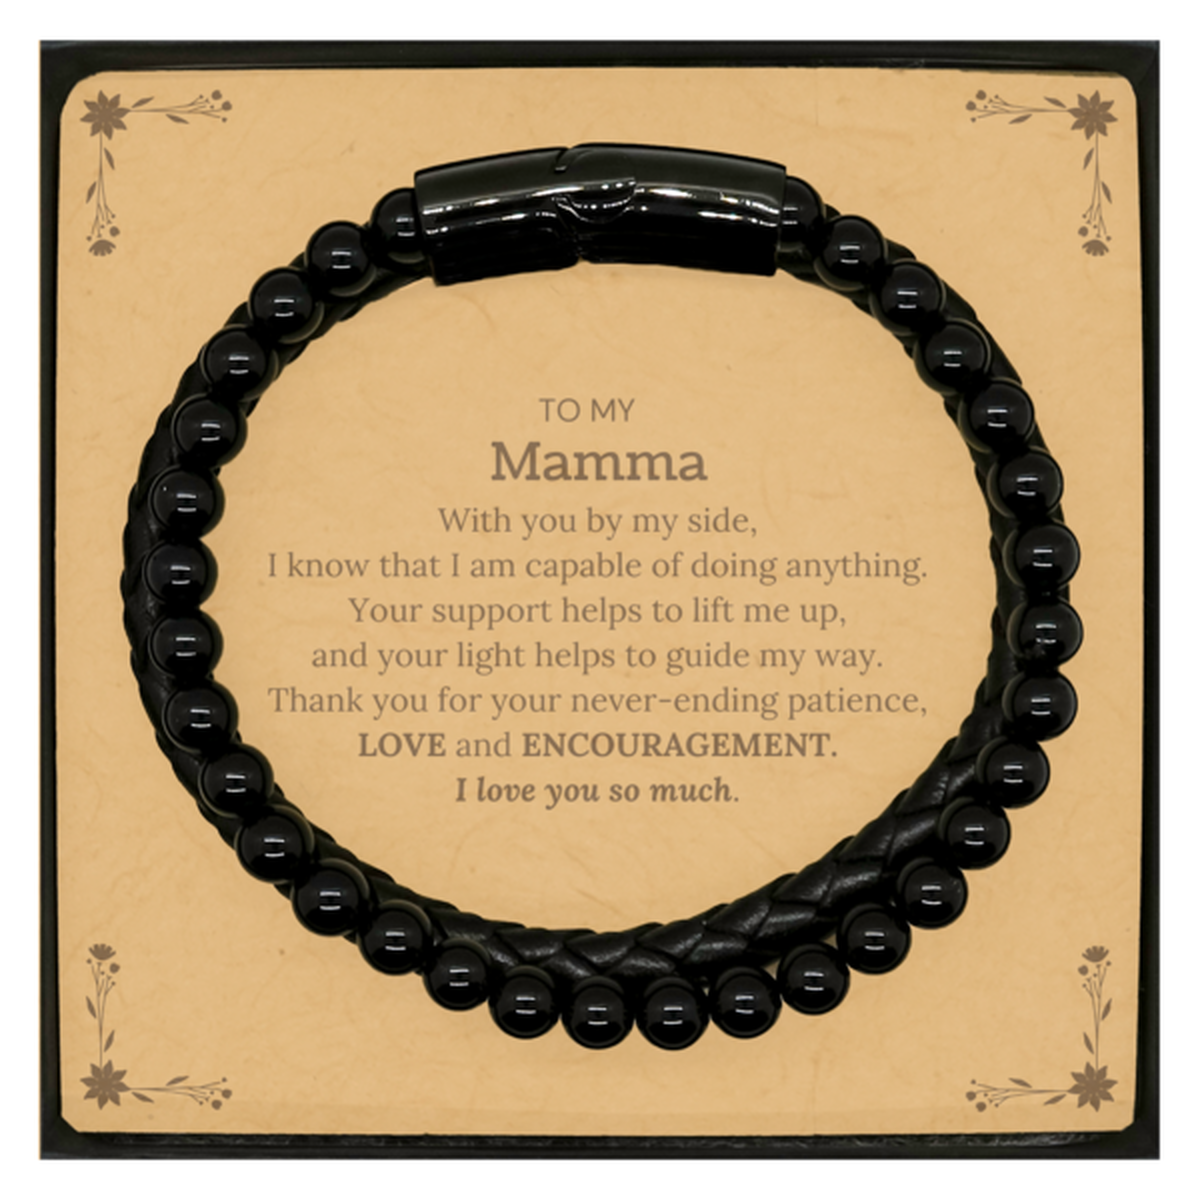 Appreciation Mamma Stone Leather Bracelets Gifts, To My Mamma Birthday Christmas Wedding Keepsake Gifts for Mamma With you by my side, I know that I am capable of doing anything. I love you so much